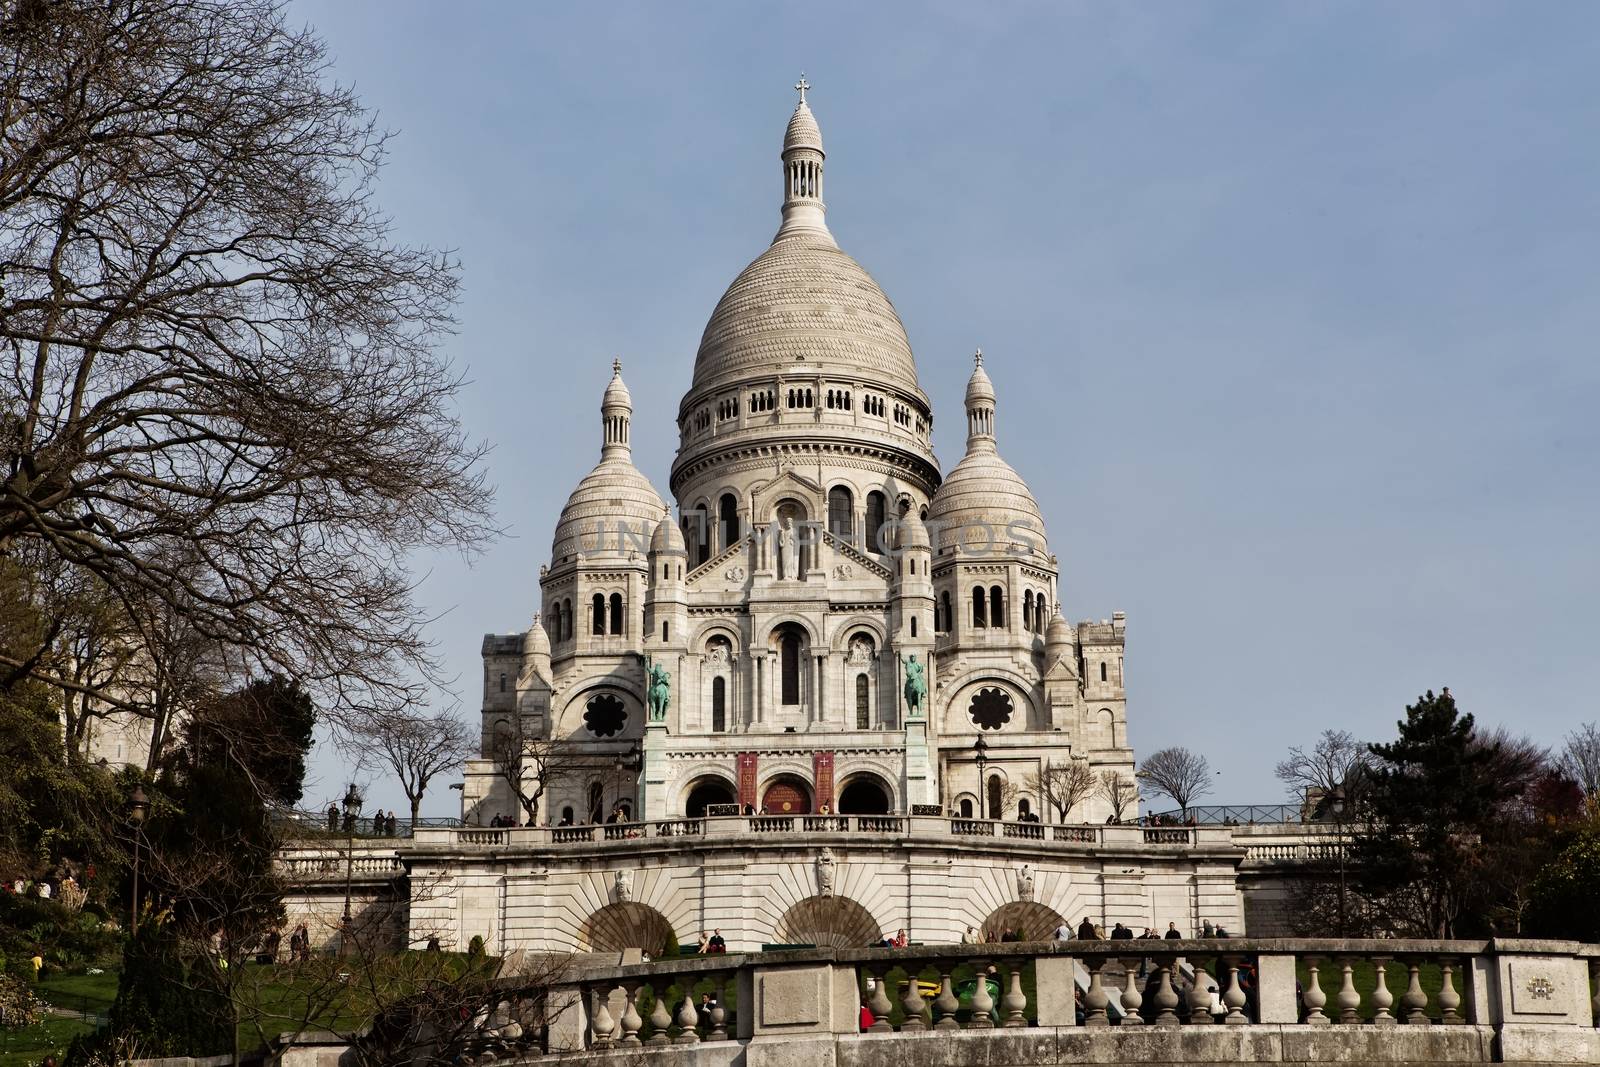 Basilica Sacre Coeur in Paris is a popular landmark, the basilica is located at the summit of the butte Montmartre, the highest point in the city.